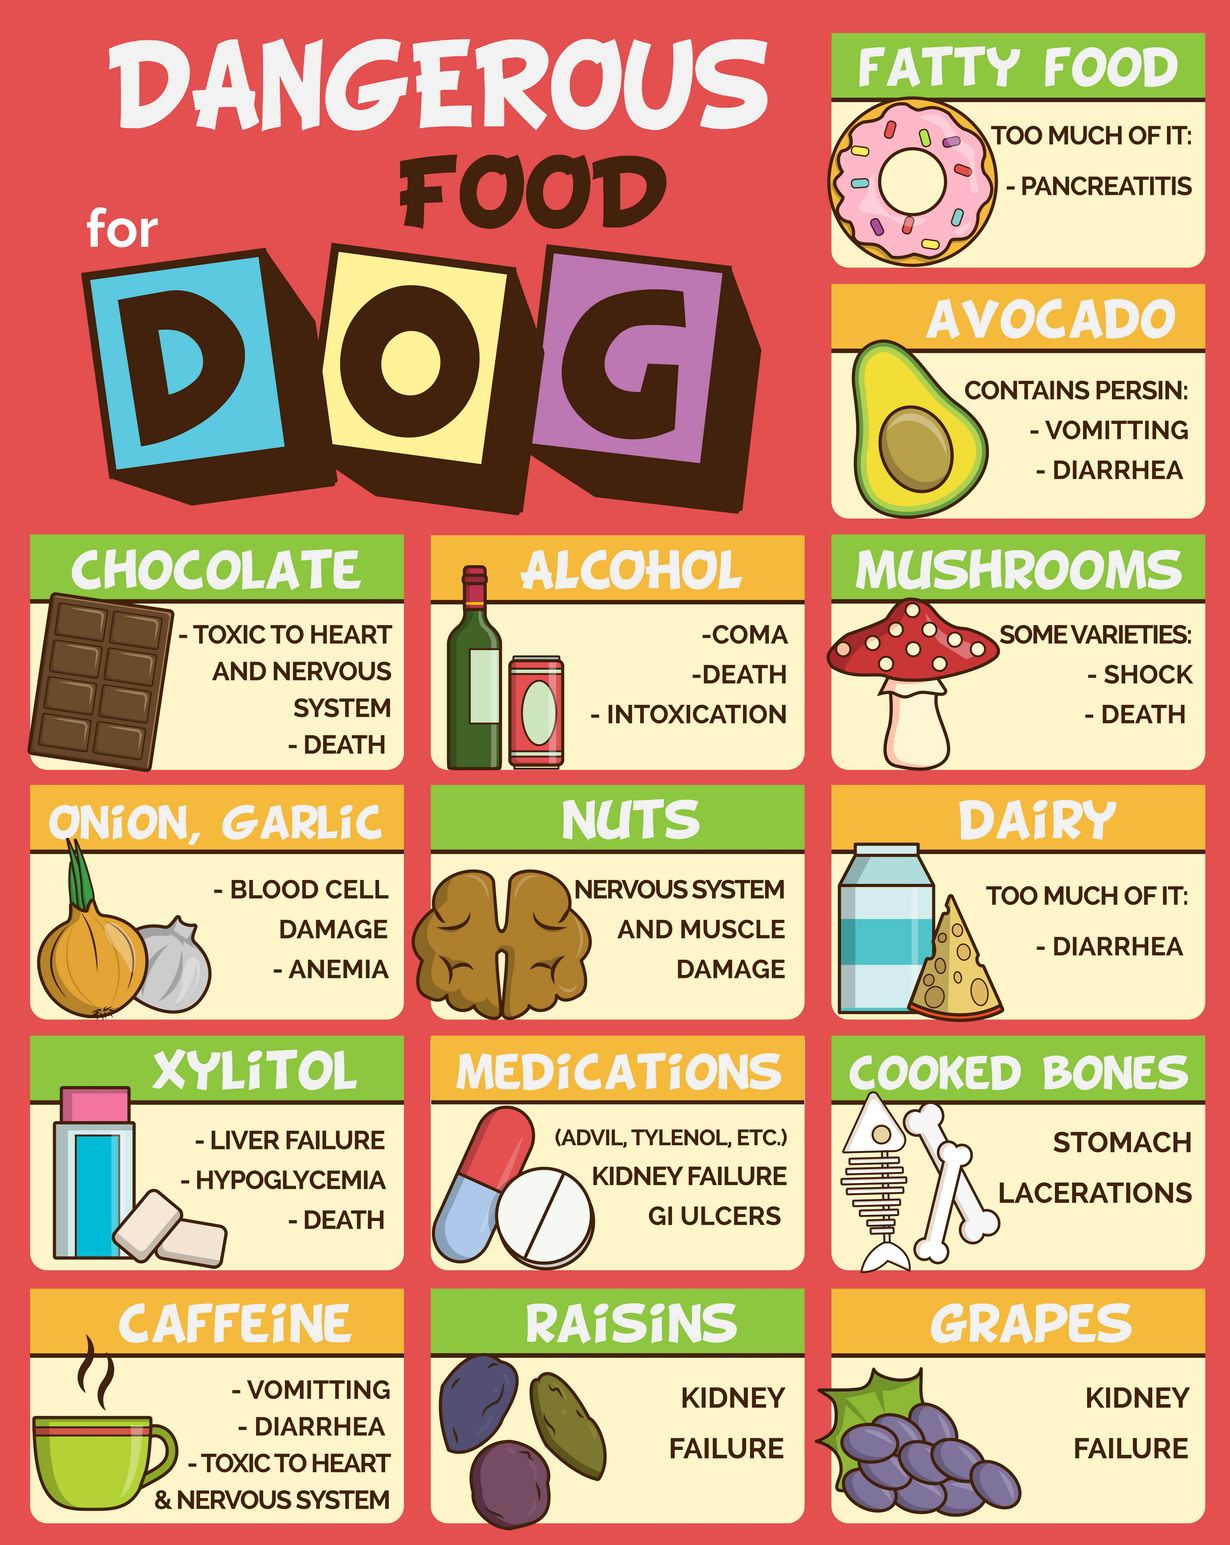 Foods that are Dangerous and Harmful to Dogs